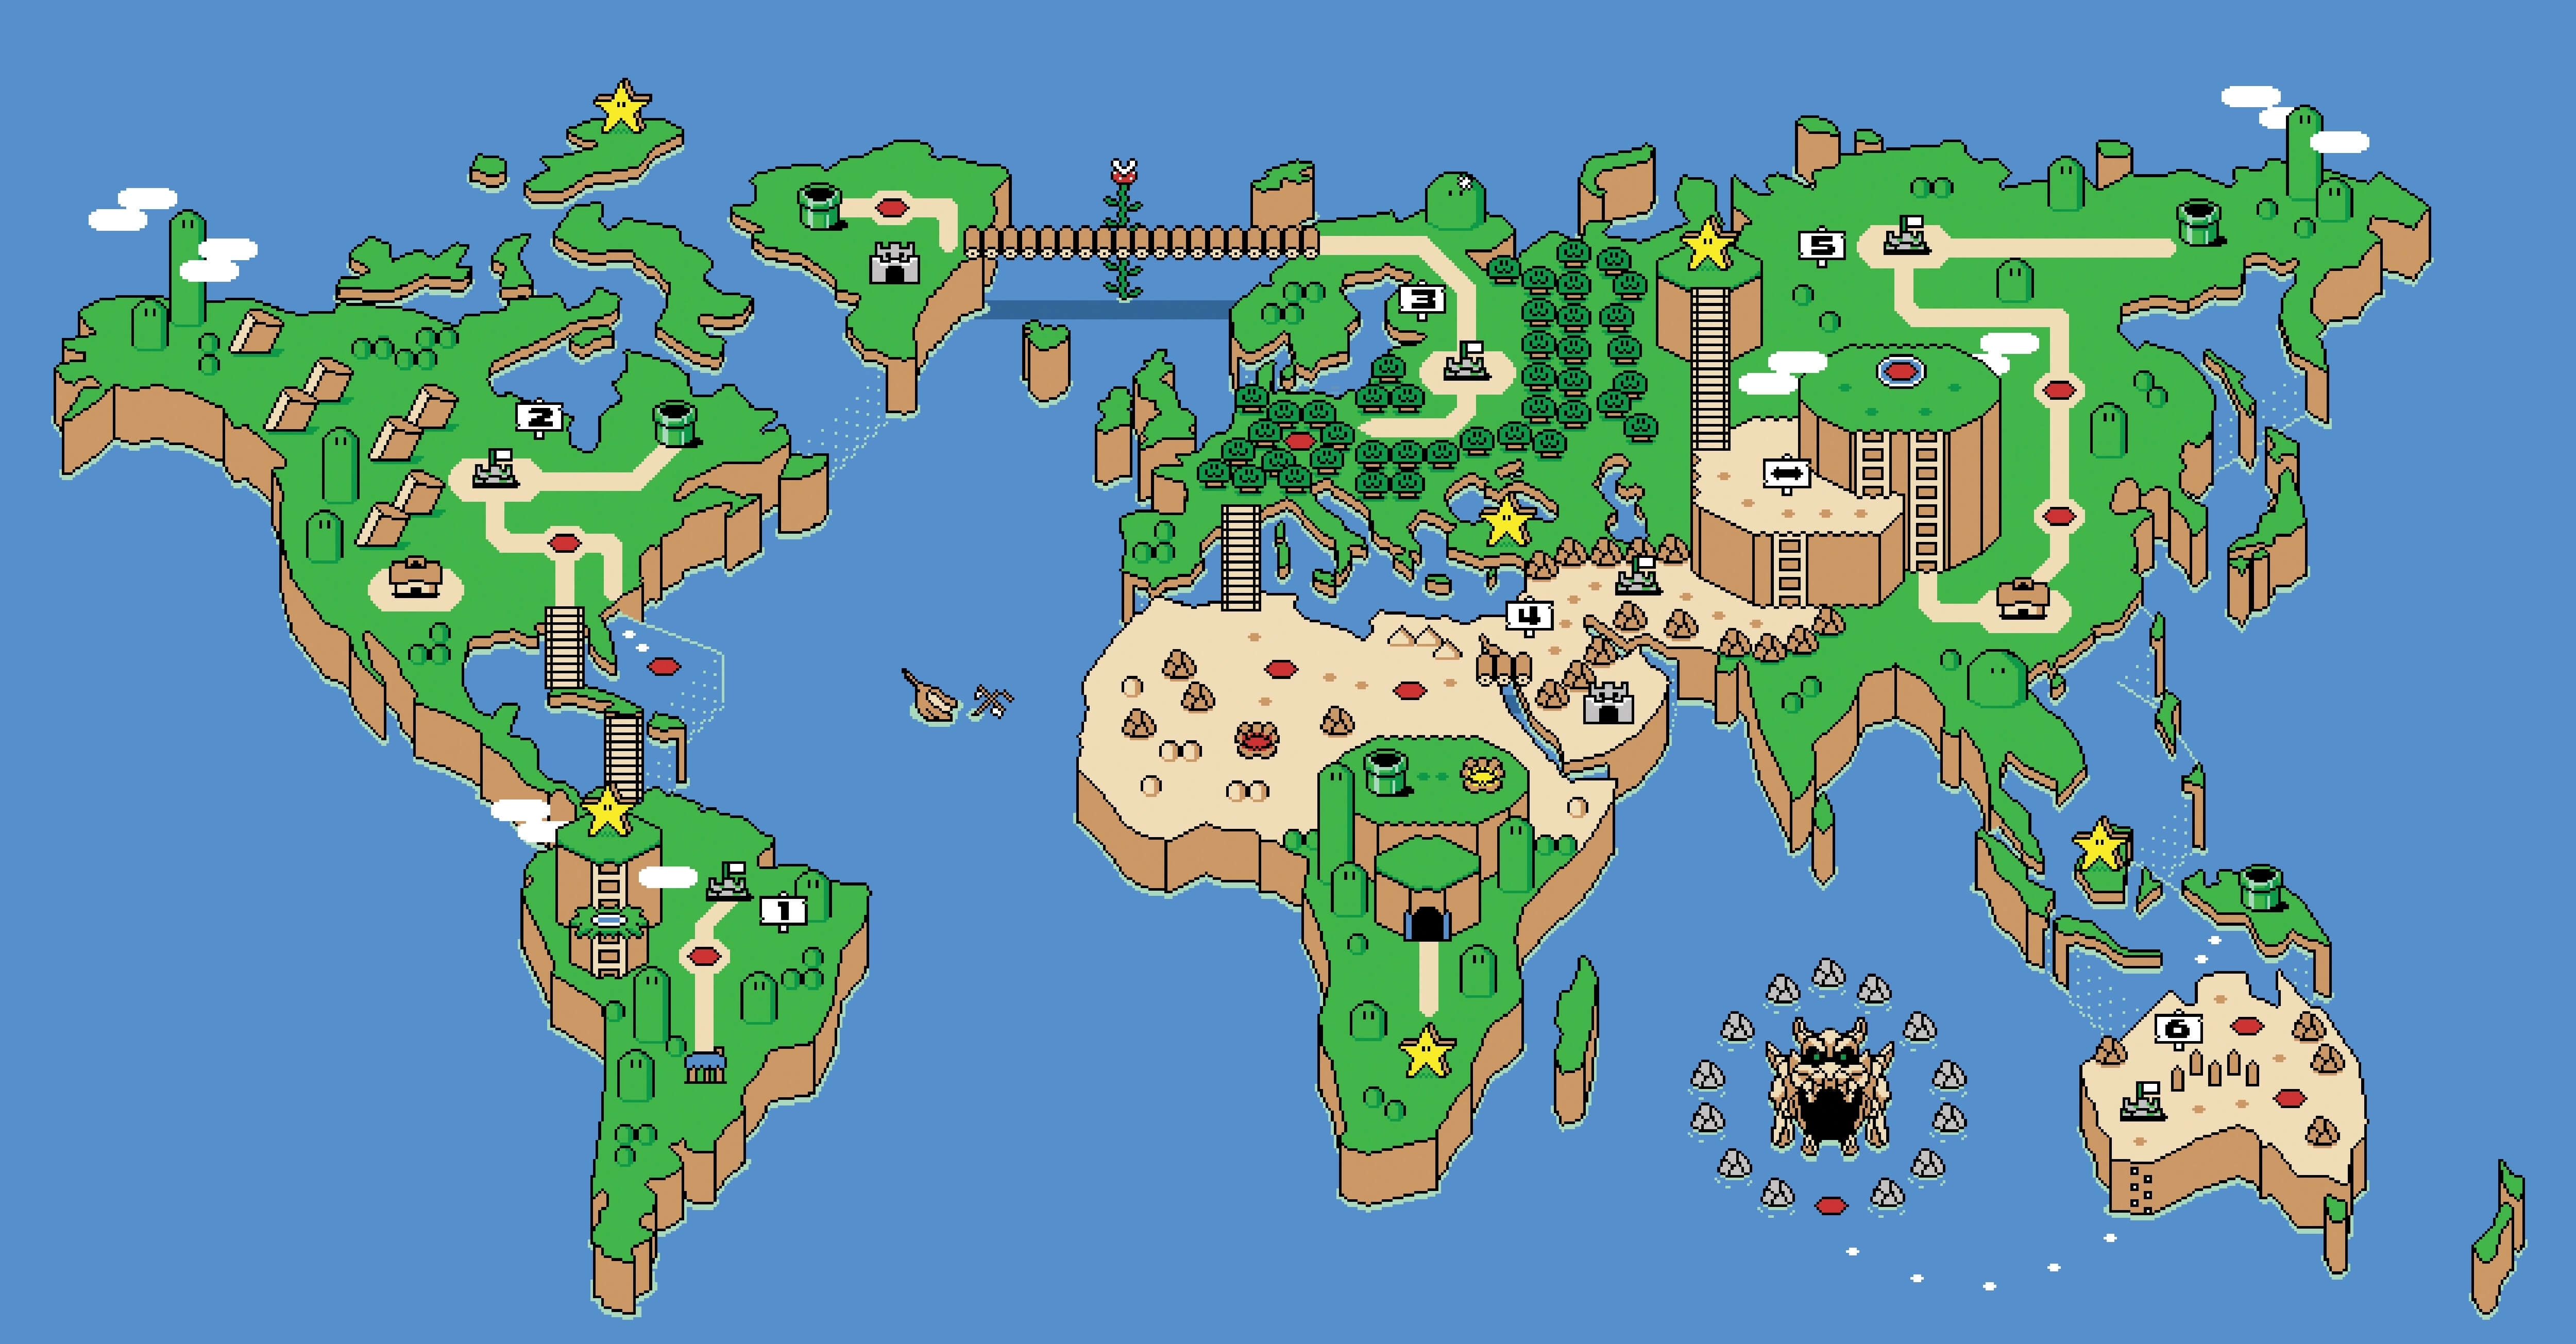 10 Best Super Mario World Map Wallpaper FULL HD 1080p For PC Background